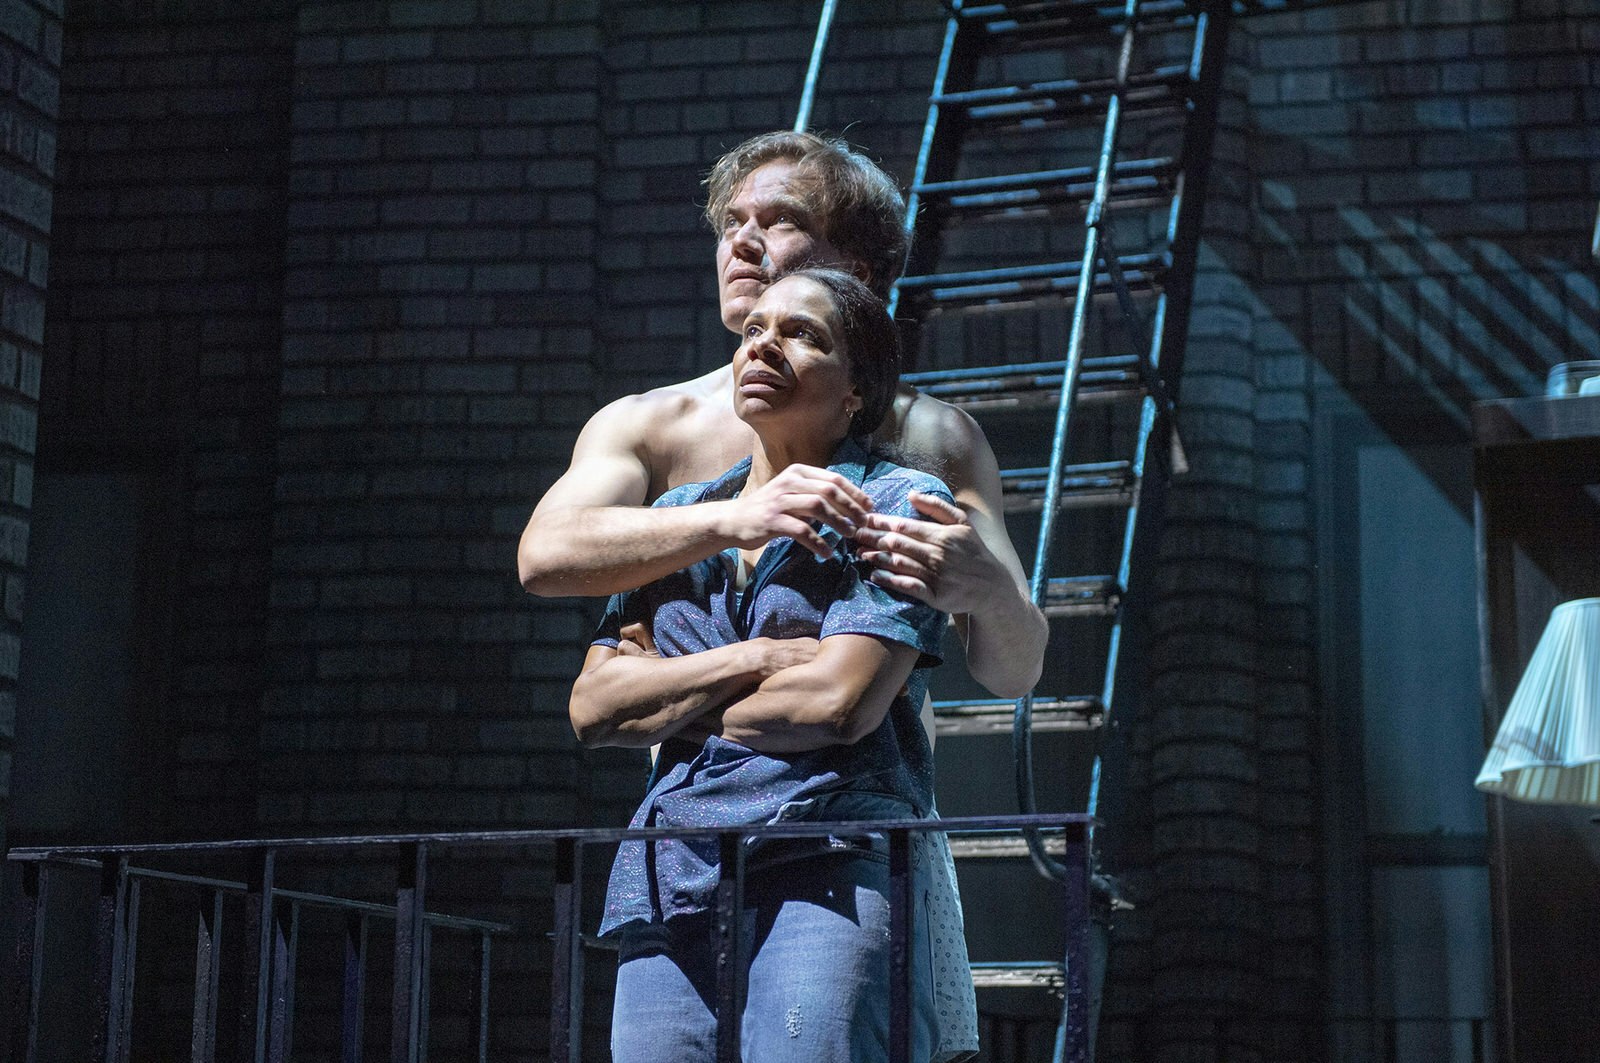 Celebrities West End Broadway - Audra McDonald and Michael Shannon star in Frankie and Johnny in the Clair de Lune at the Broadhurst Theatre, New York. The actors embrace on stage in front of a staircase © Deen van Meer